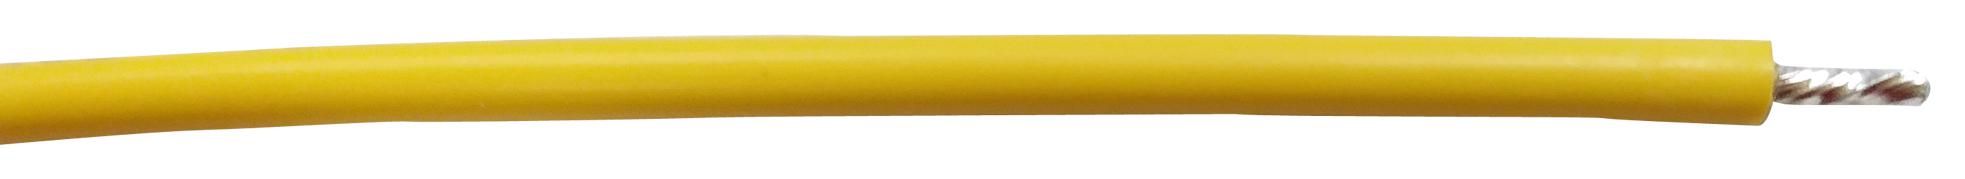 PP002369 HOOK-UP WIRE, 26AWG, YELLOW, 305M, 300V PRO POWER